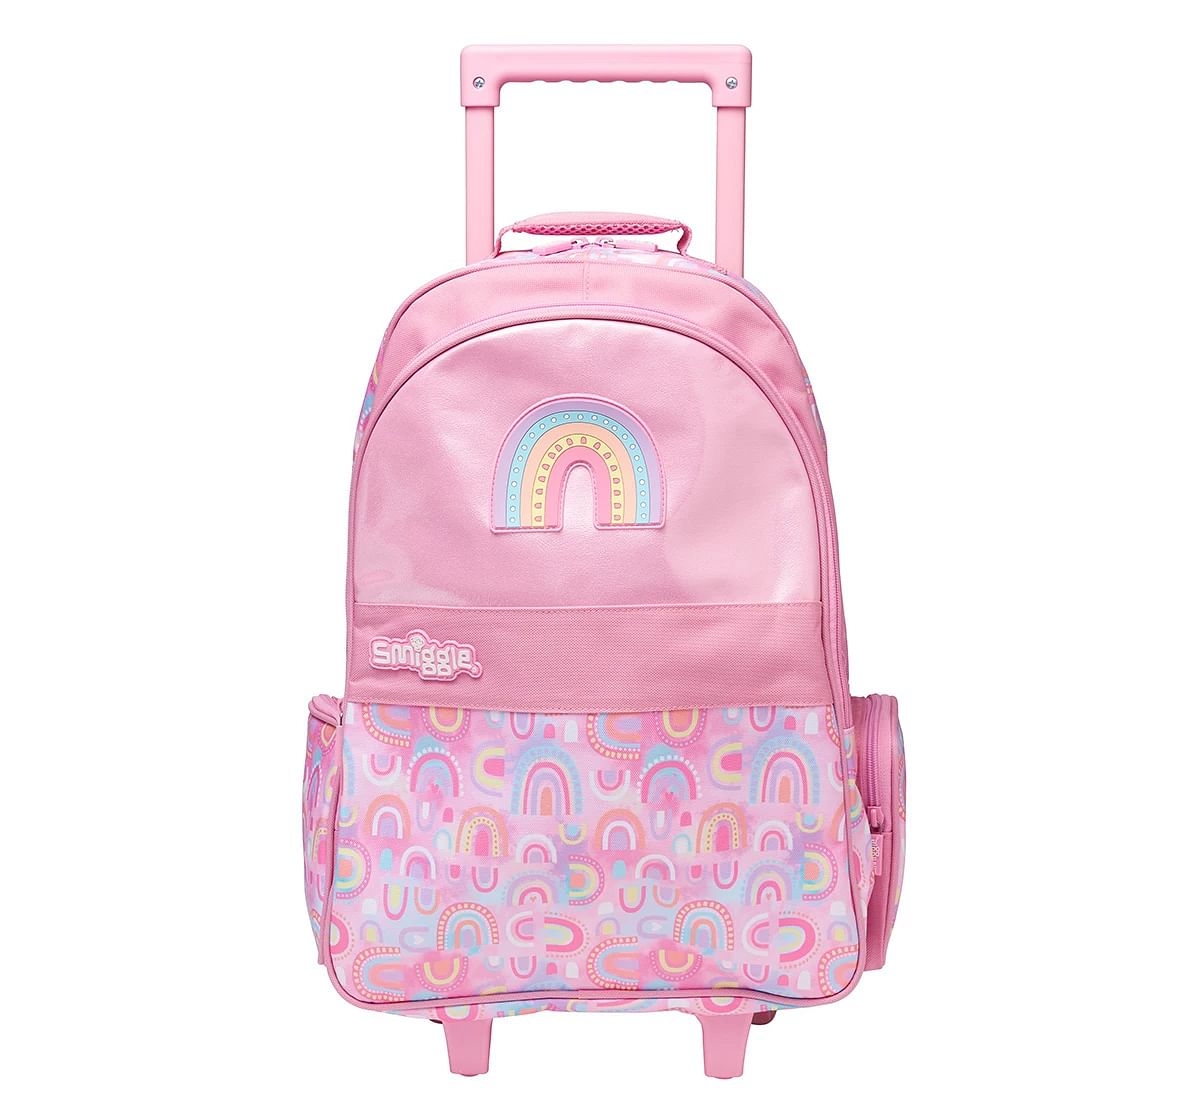 Smiggle Bright Side Trolley With Light Up Wheels for Kids 3Y+, Pink